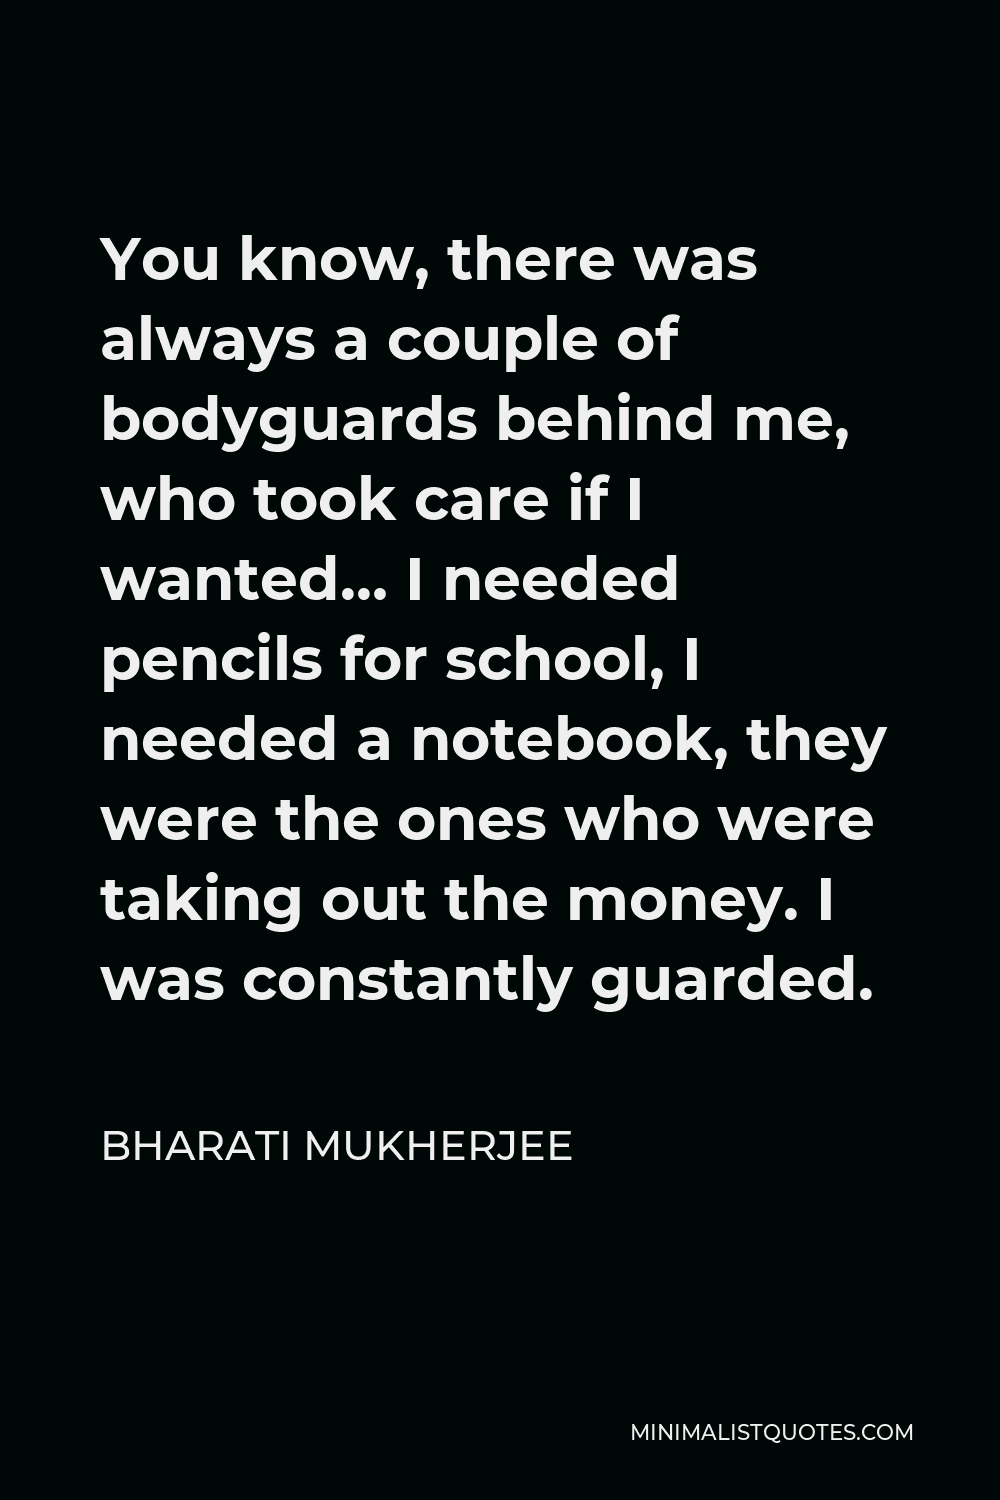 Bharati Mukherjee Quote - You know, there was always a couple of bodyguards behind me, who took care if I wanted… I needed pencils for school, I needed a notebook, they were the ones who were taking out the money. I was constantly guarded.